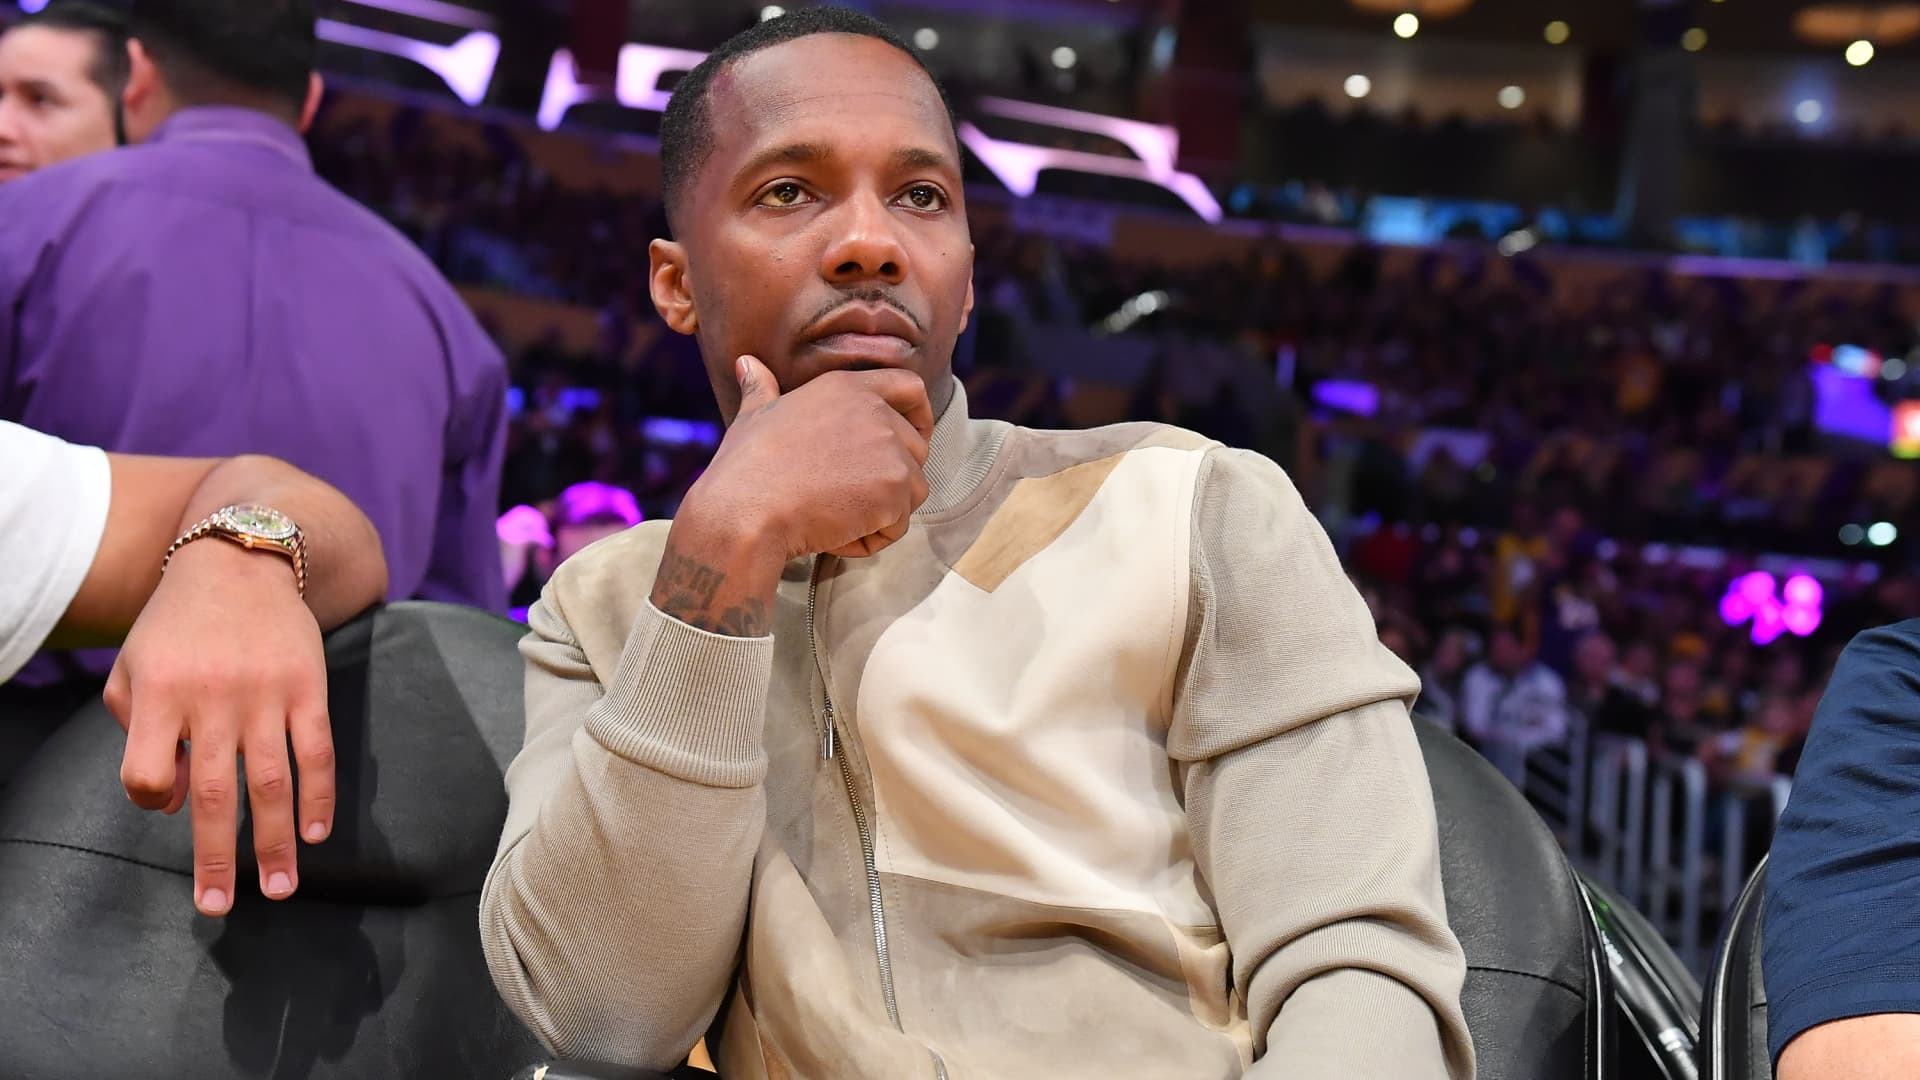 Robinhood partners with Klutch and Rich Paul, LeBron James’ agent